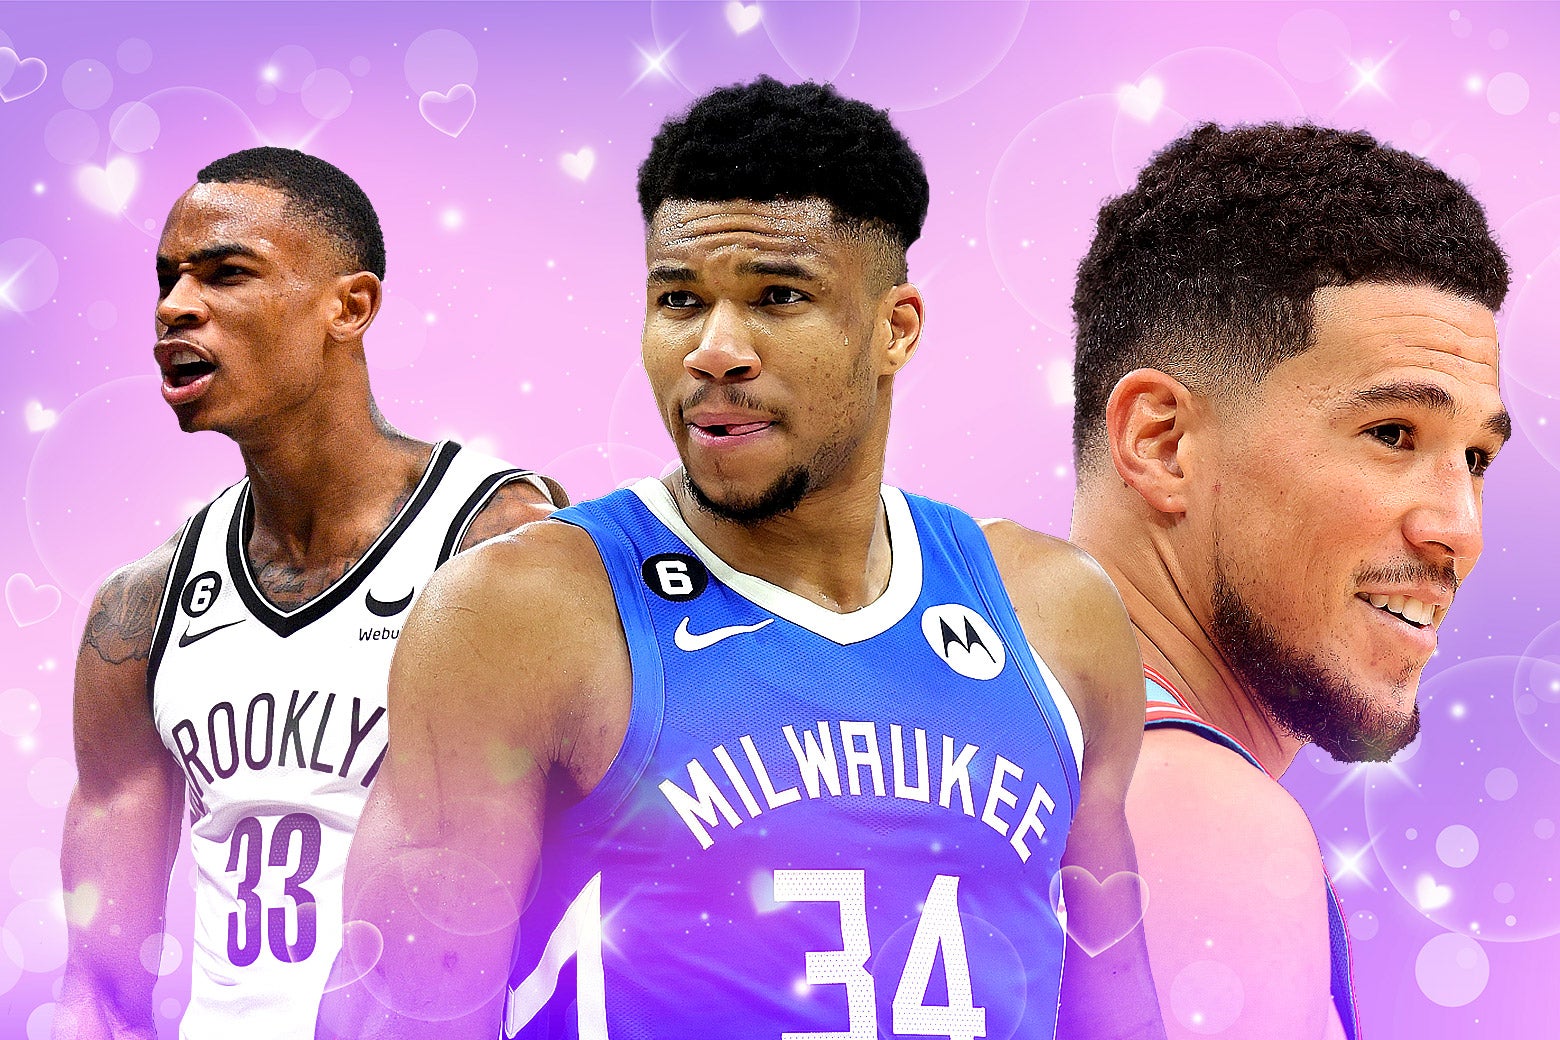 AllHunk NBA teams How the hottest pro basketball players are picked.